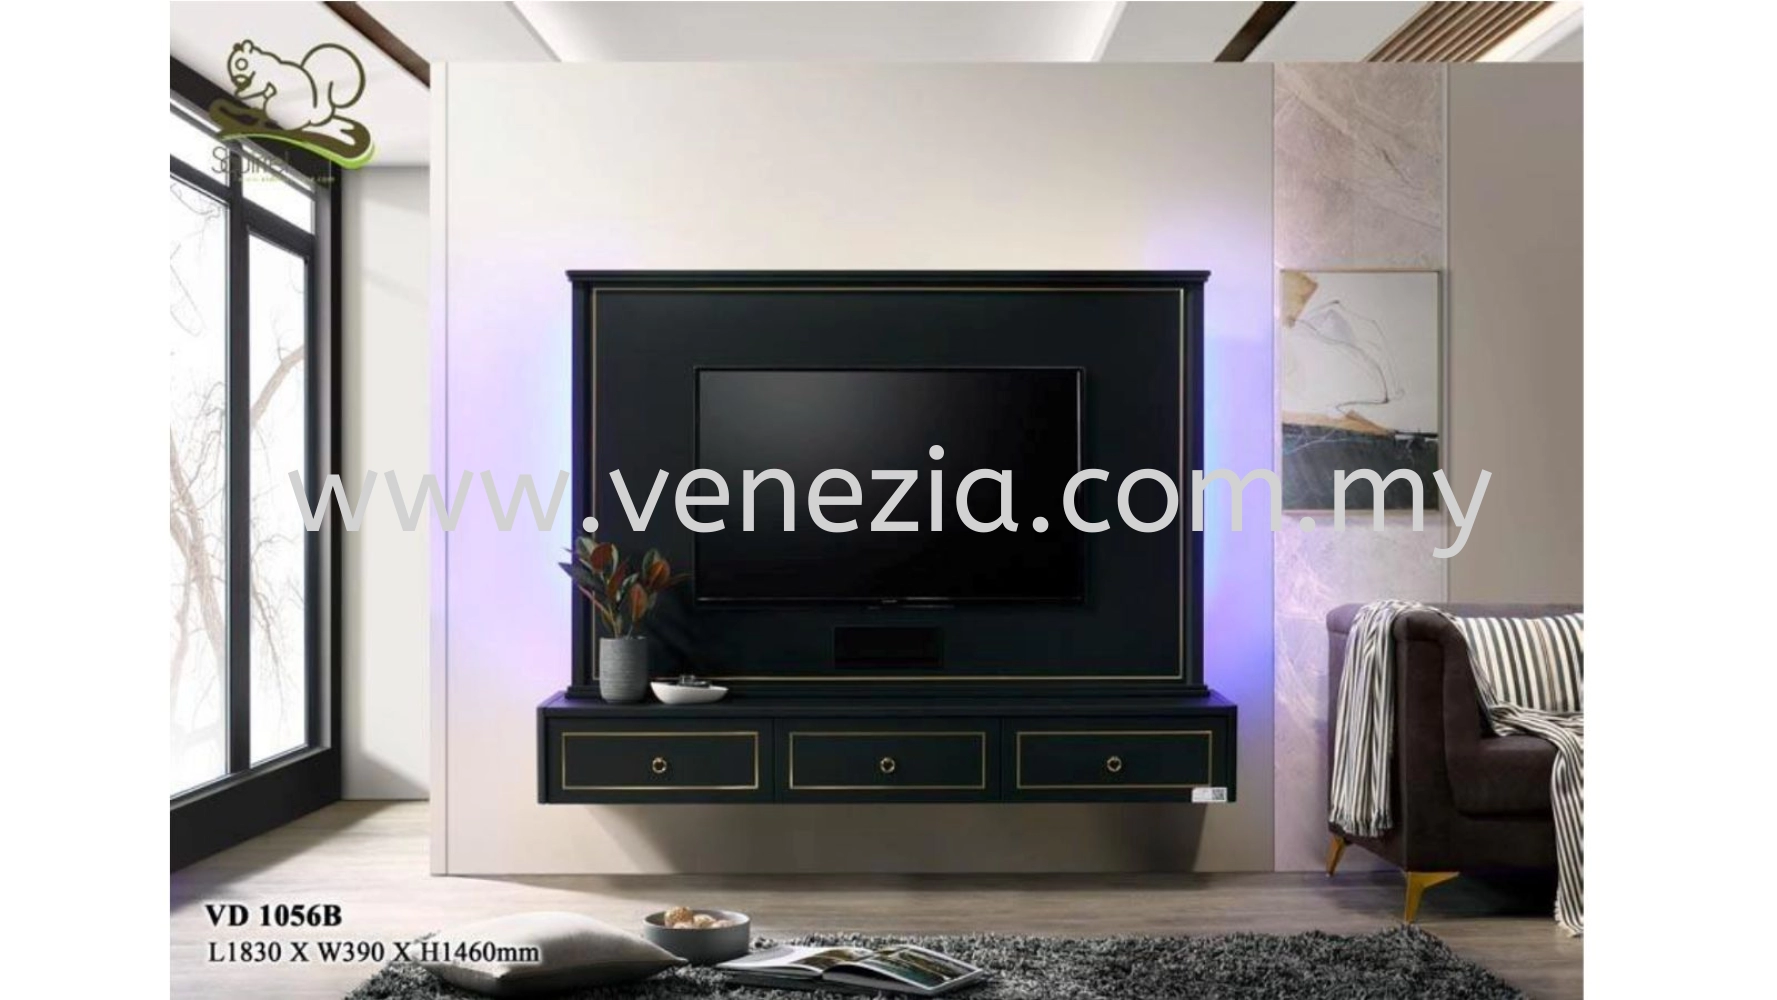 VVD 1056W Wall Mounted Tv Cabinet